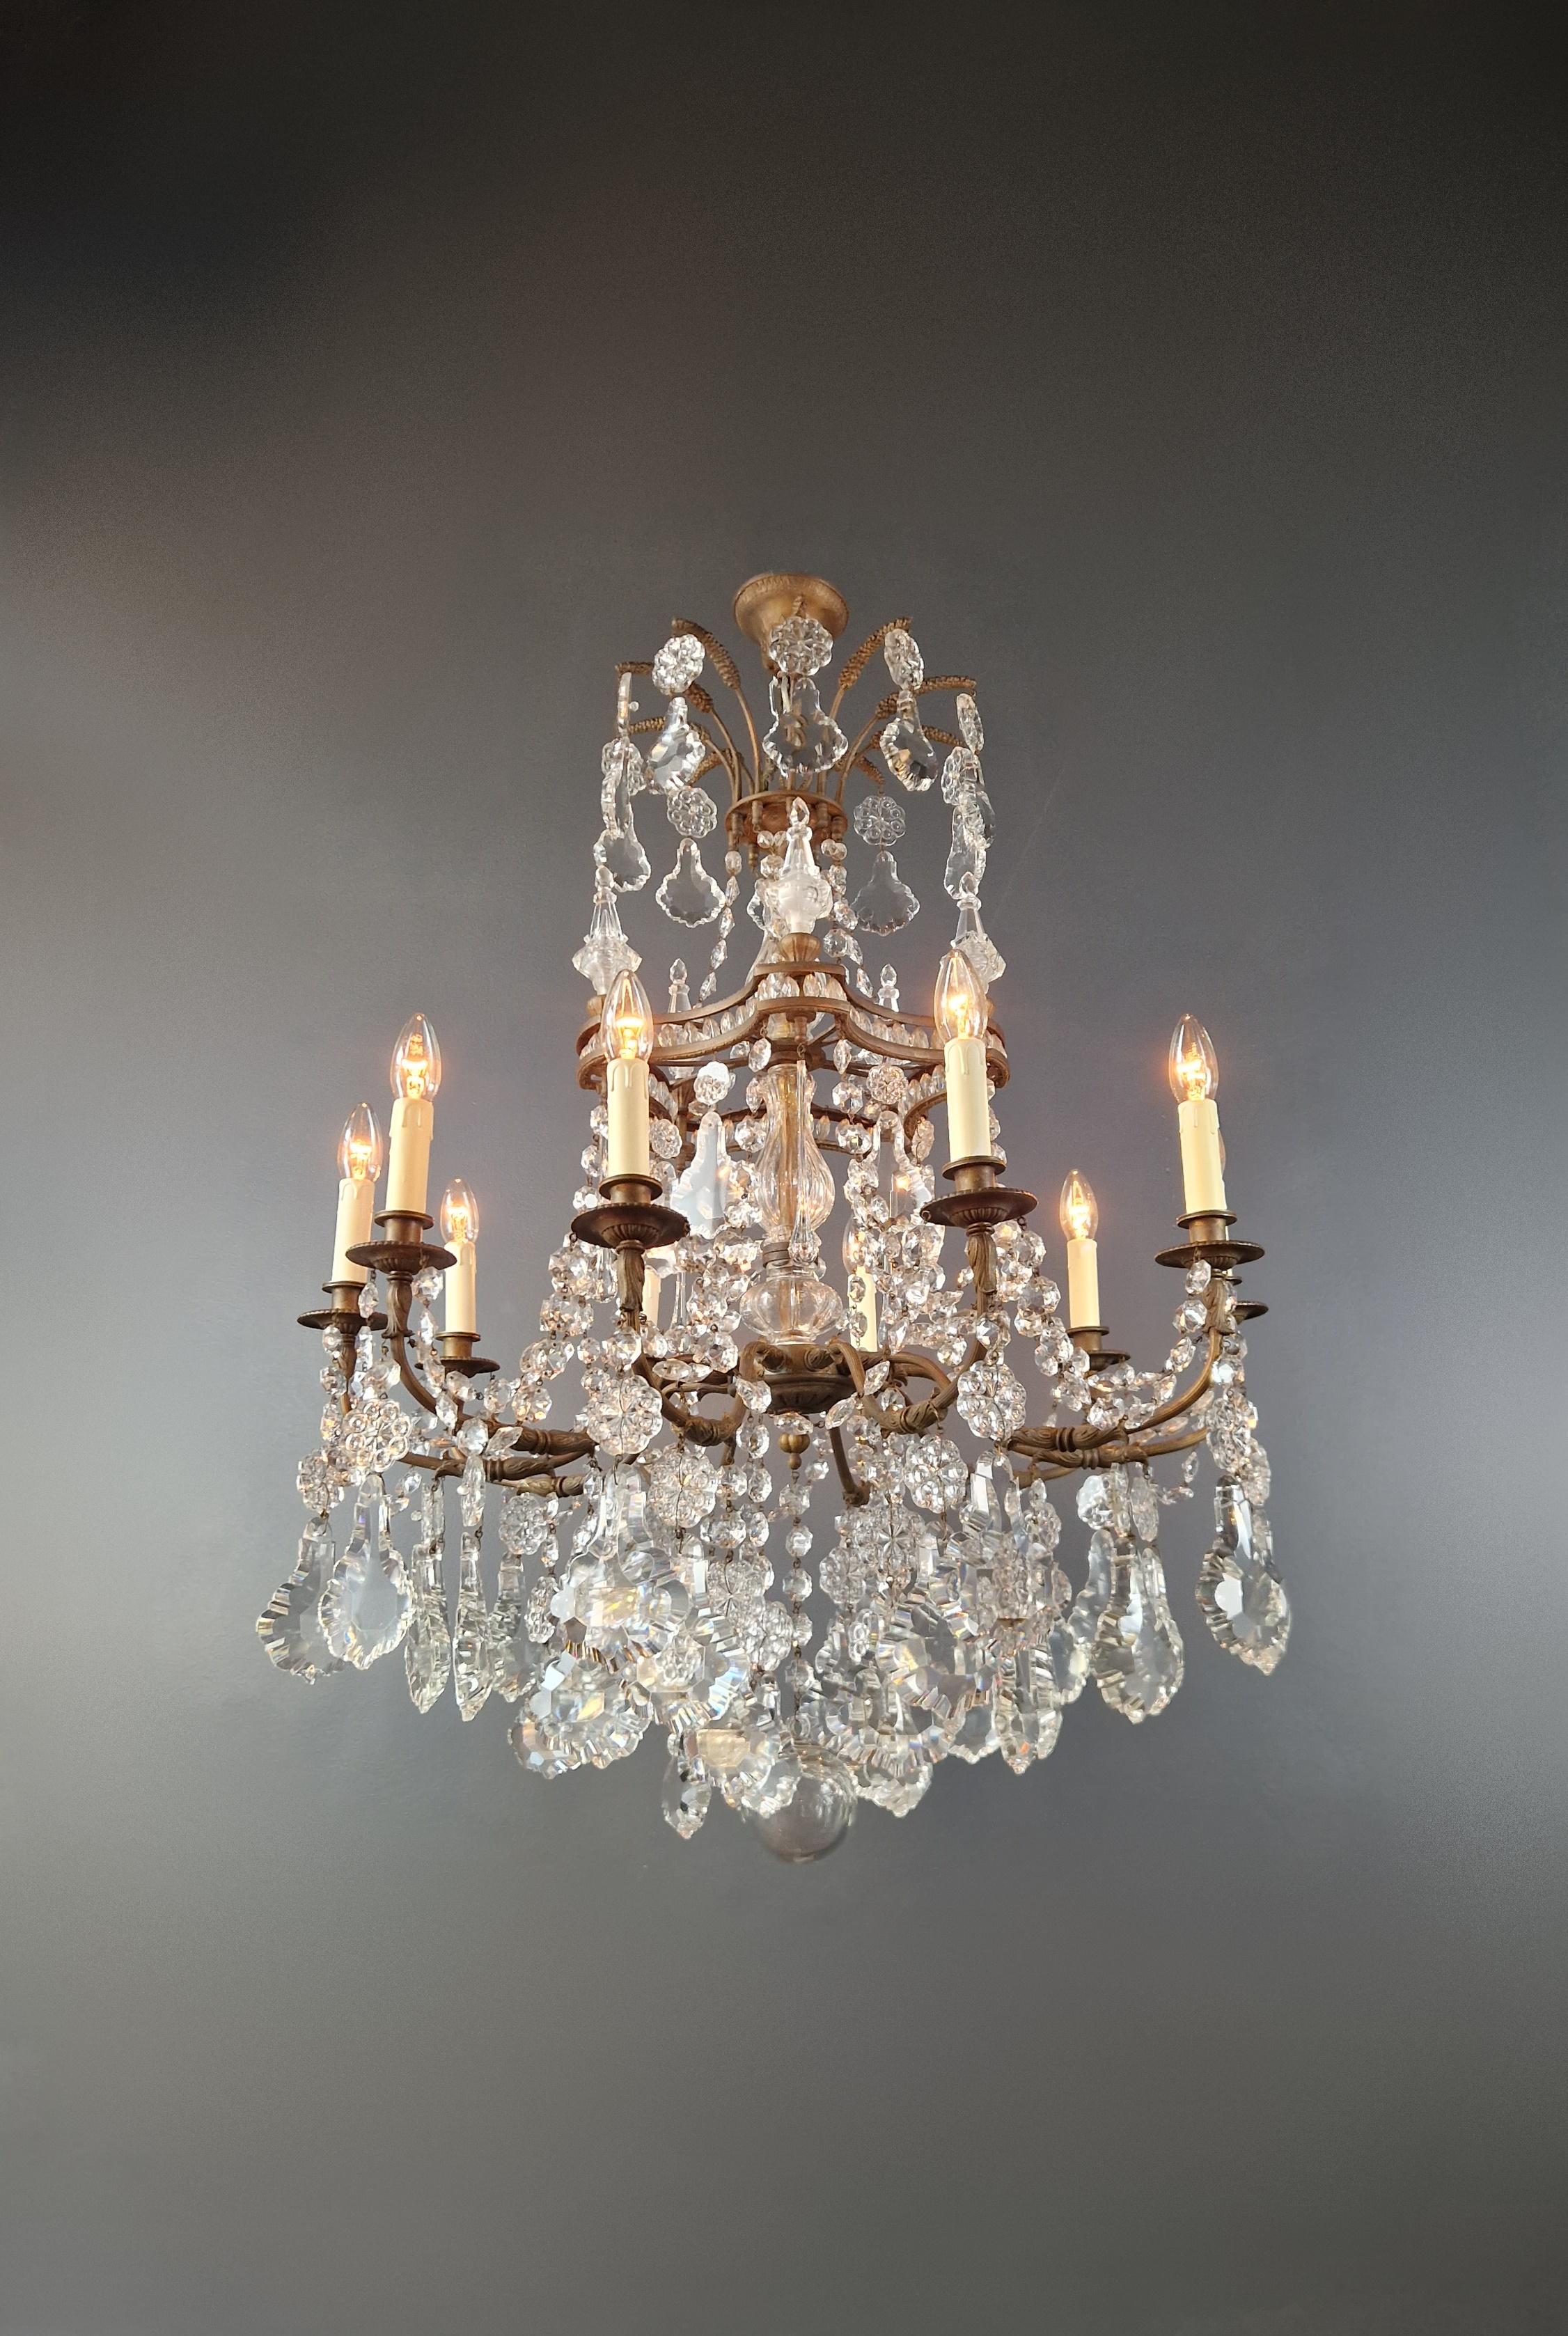 Art Nouveau Crystal Chandelier Brass Large Crystals Traditional Antique Ceiling For Sale 1